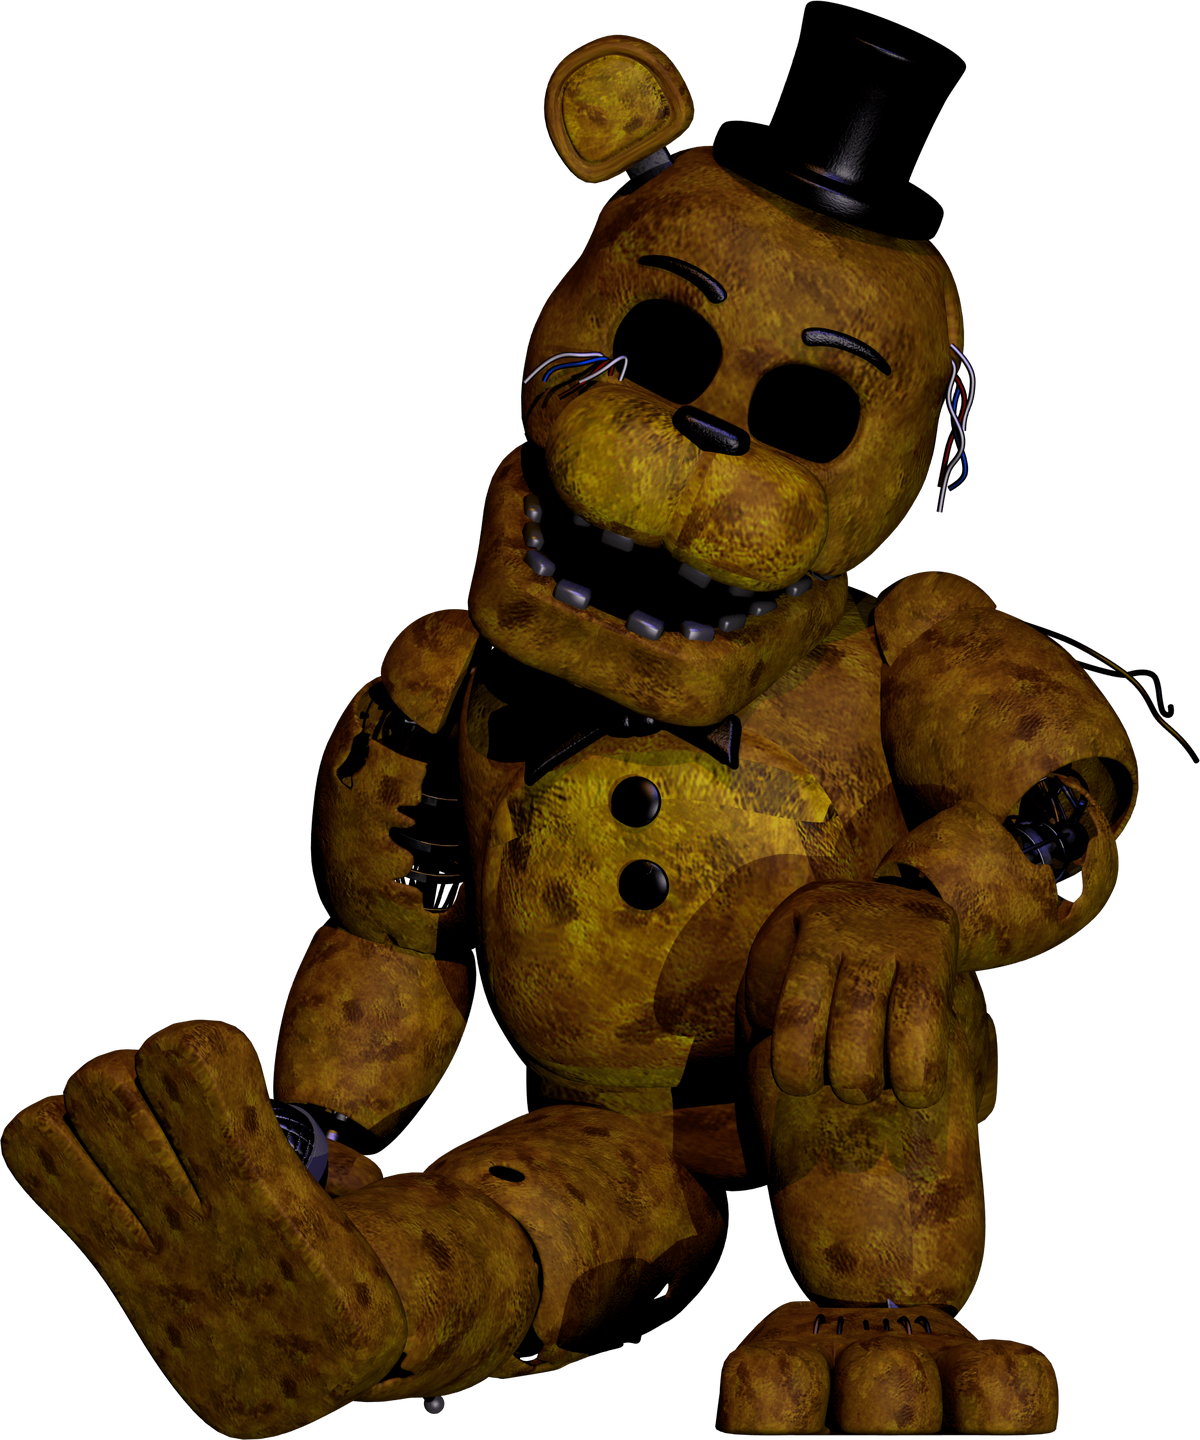 Fredbear and Golden Freddy are different animatronics.